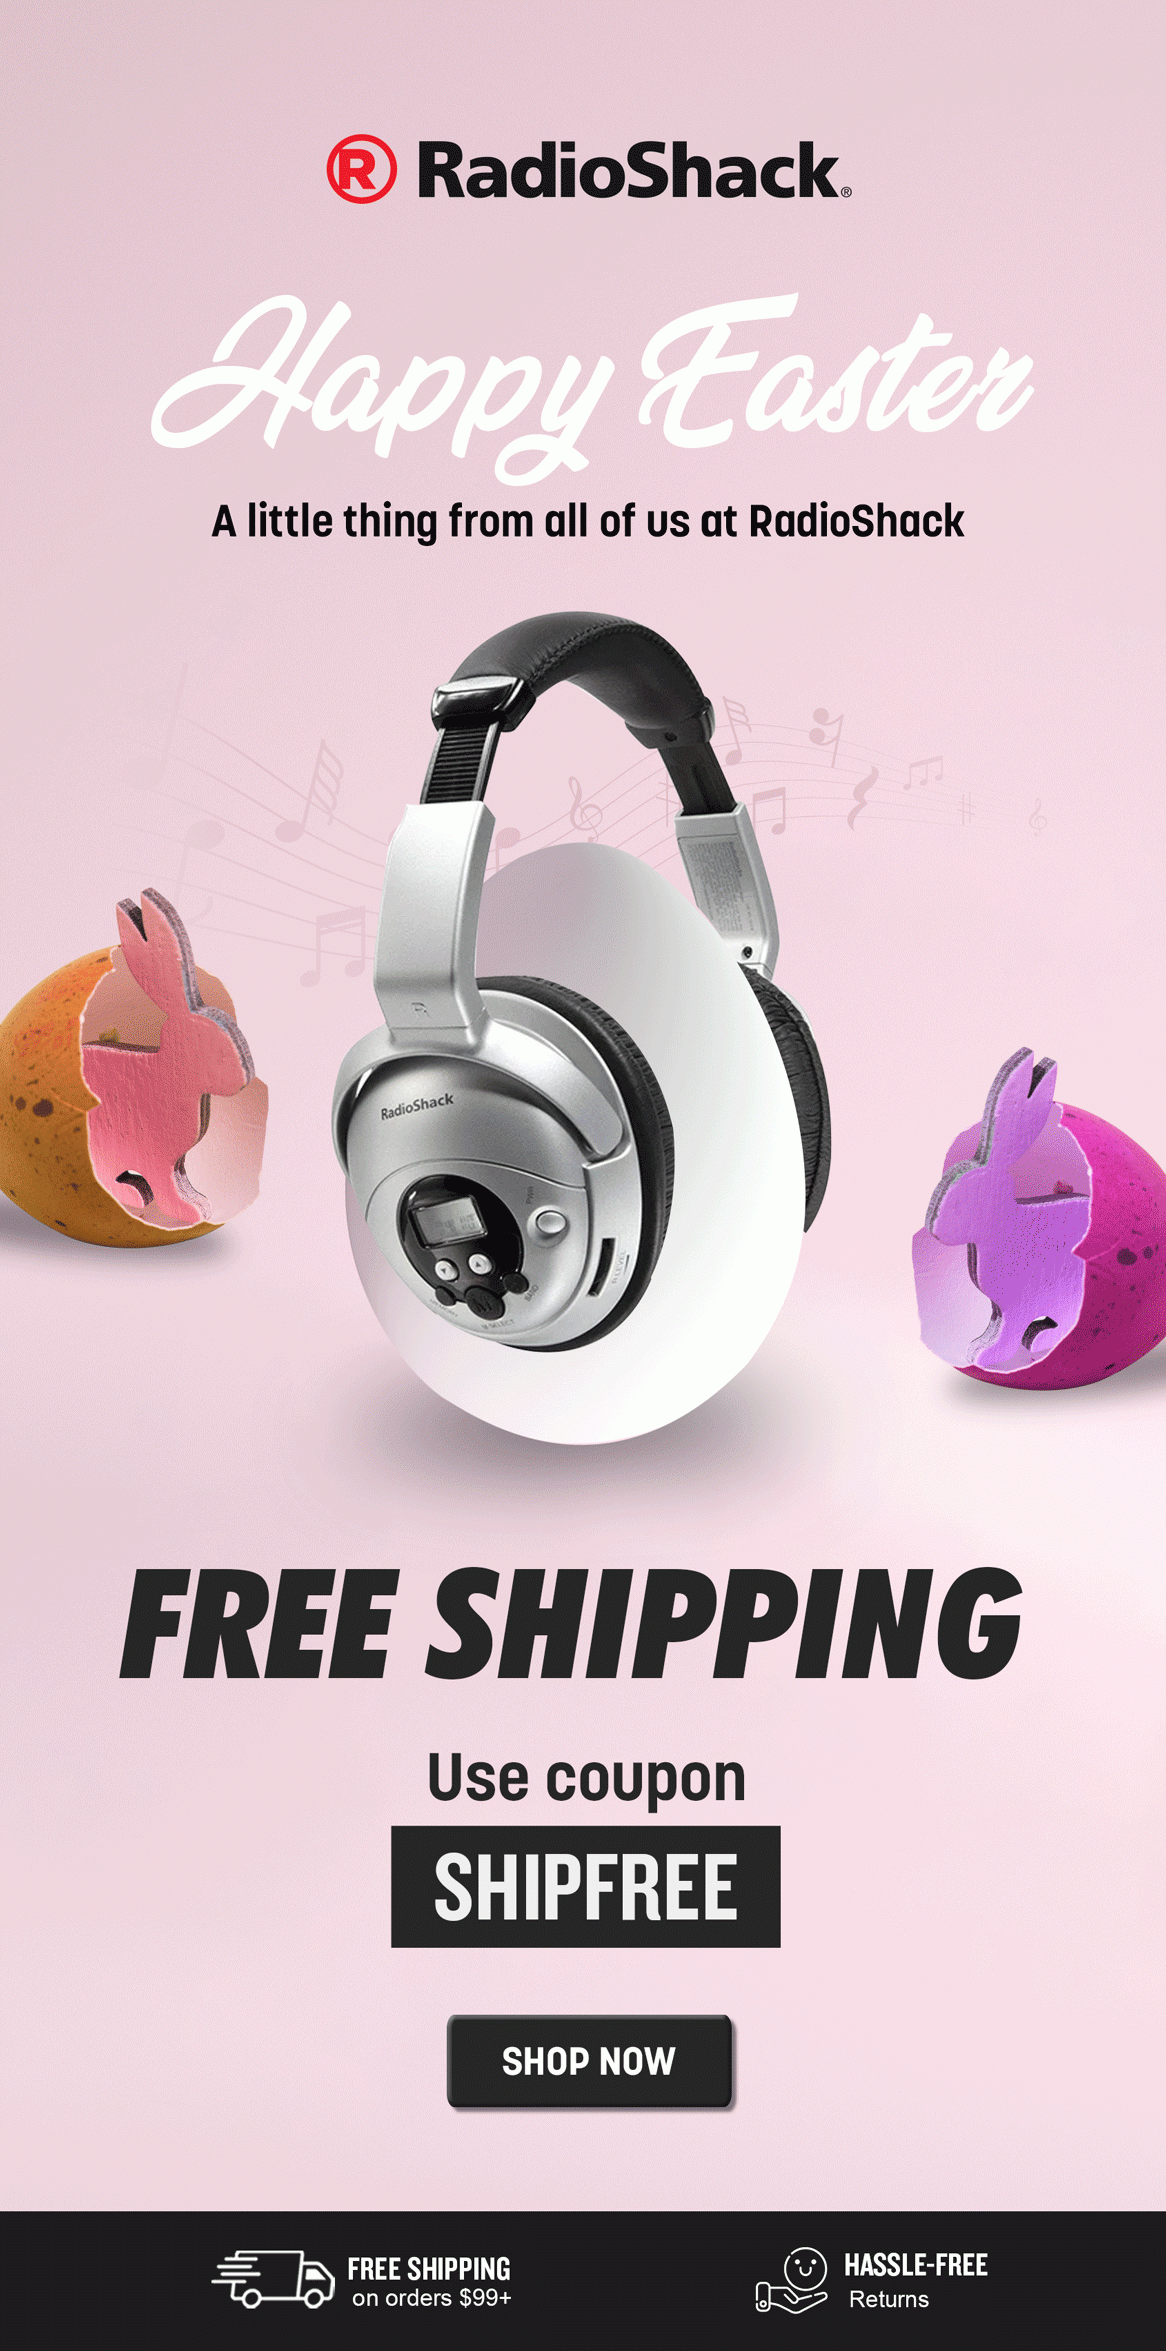 Free shipping included